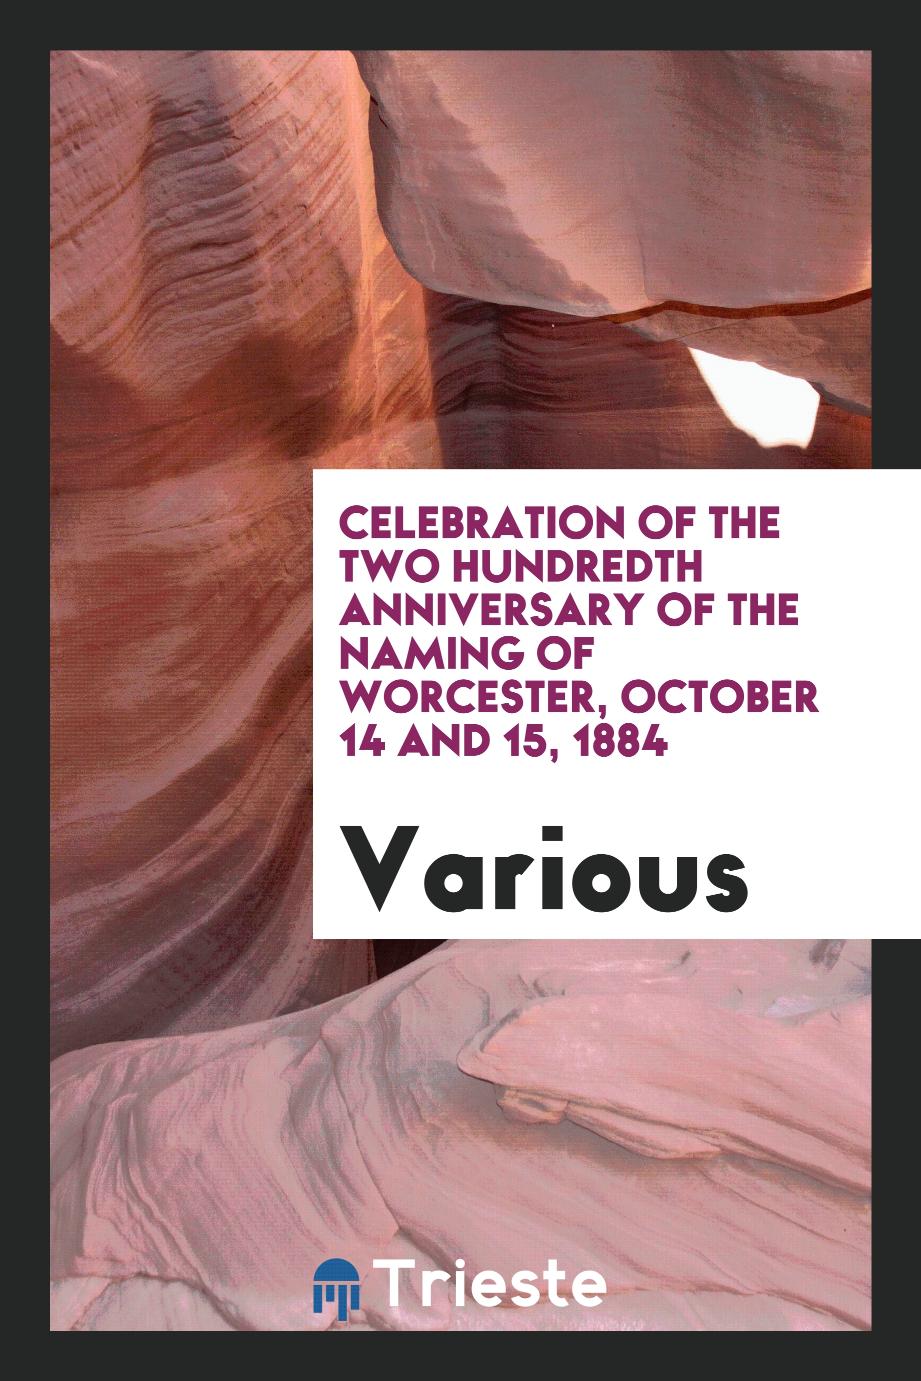 Celebration of the Two Hundredth Anniversary of the Naming of Worcester, October 14 and 15, 1884